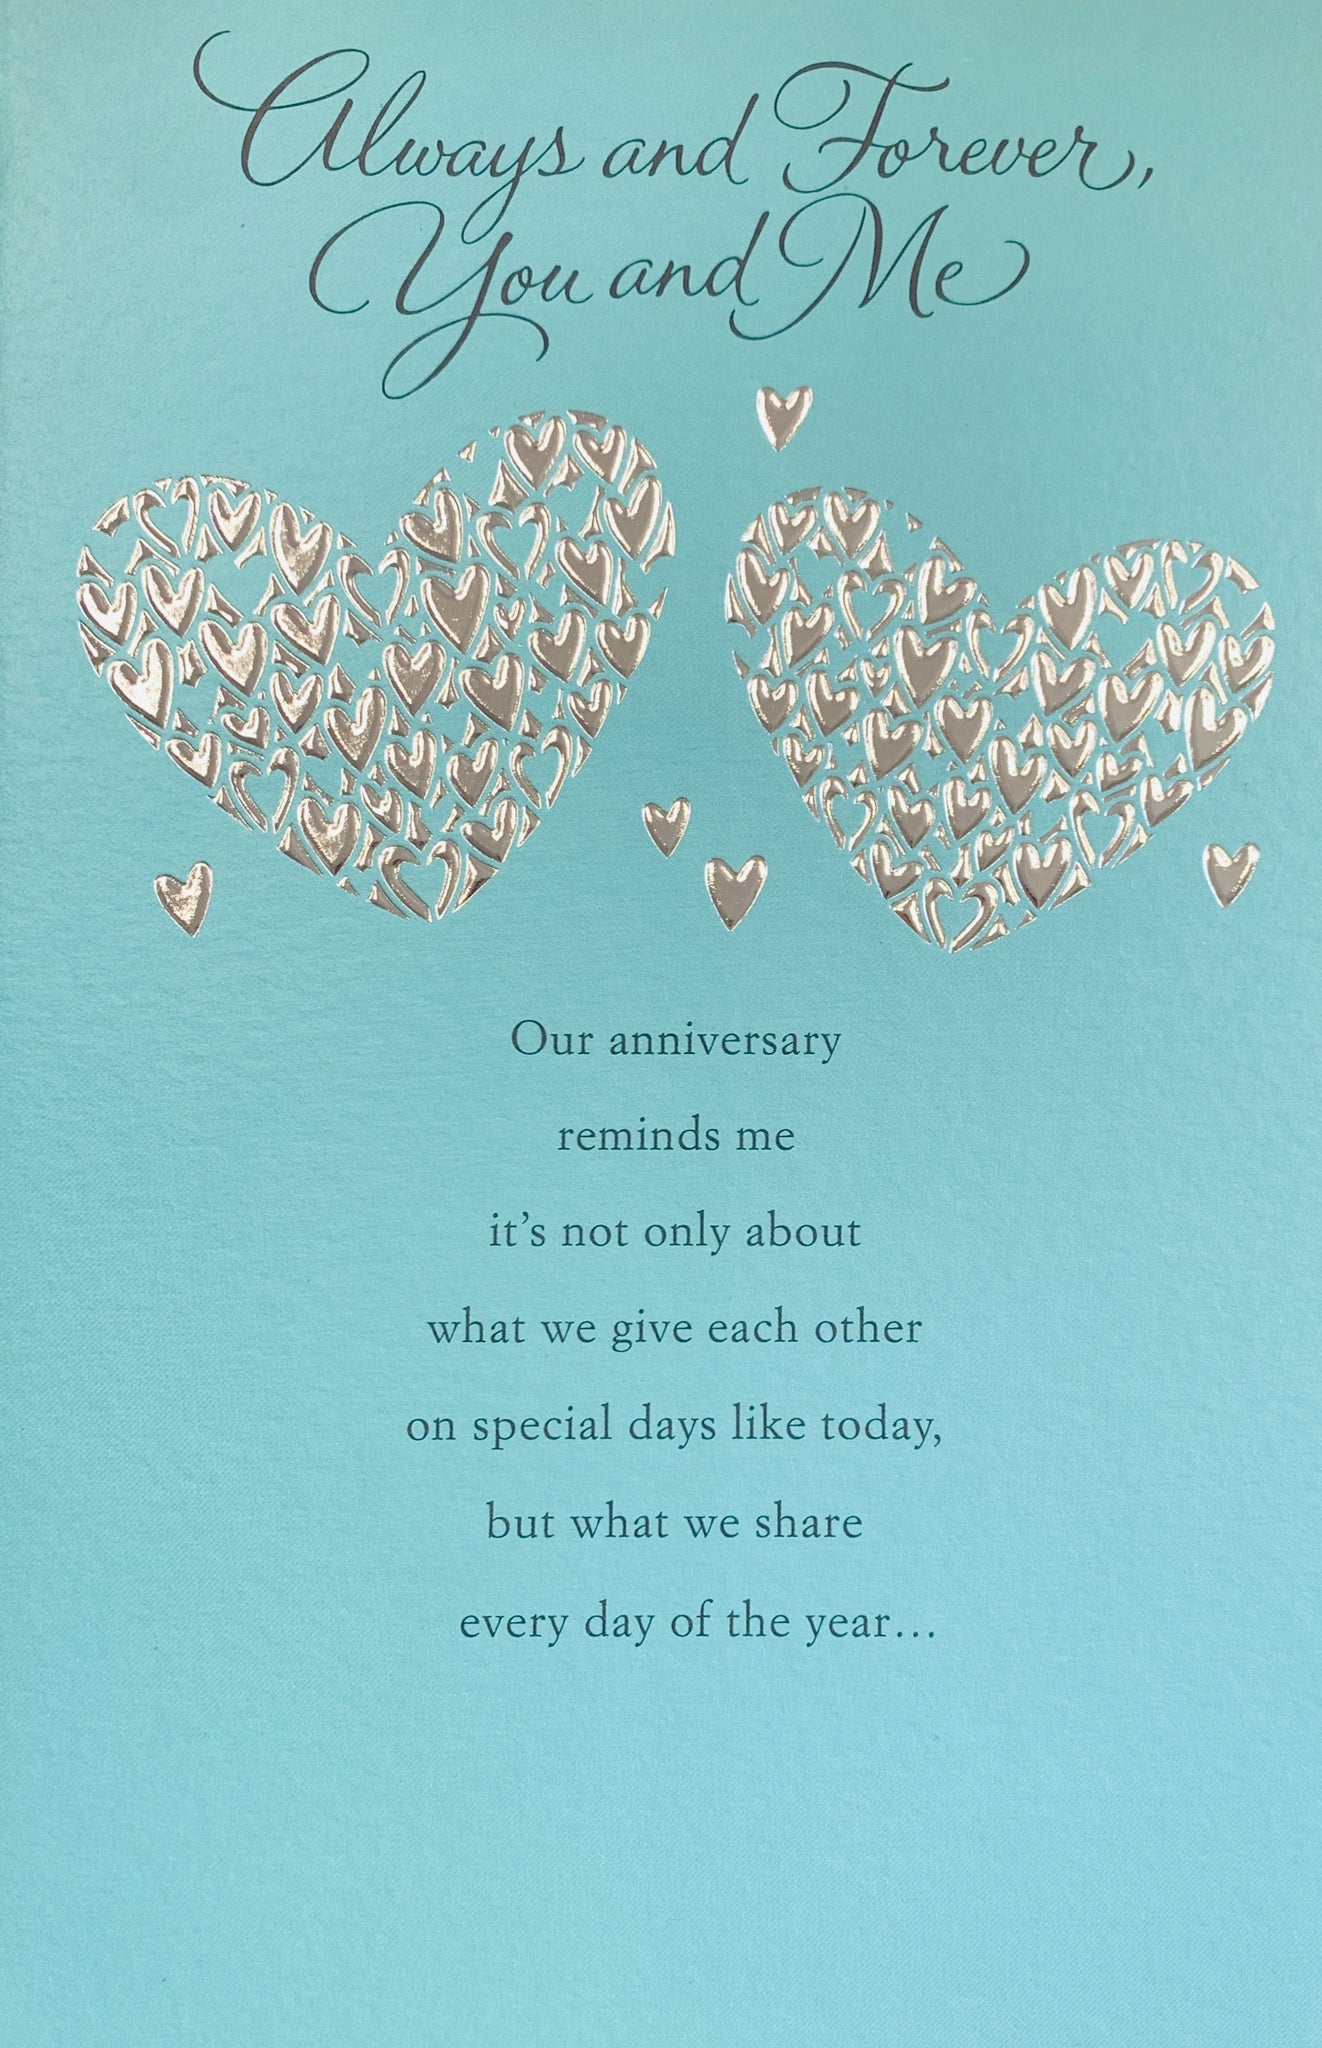 Our anniversary card - you and me forever